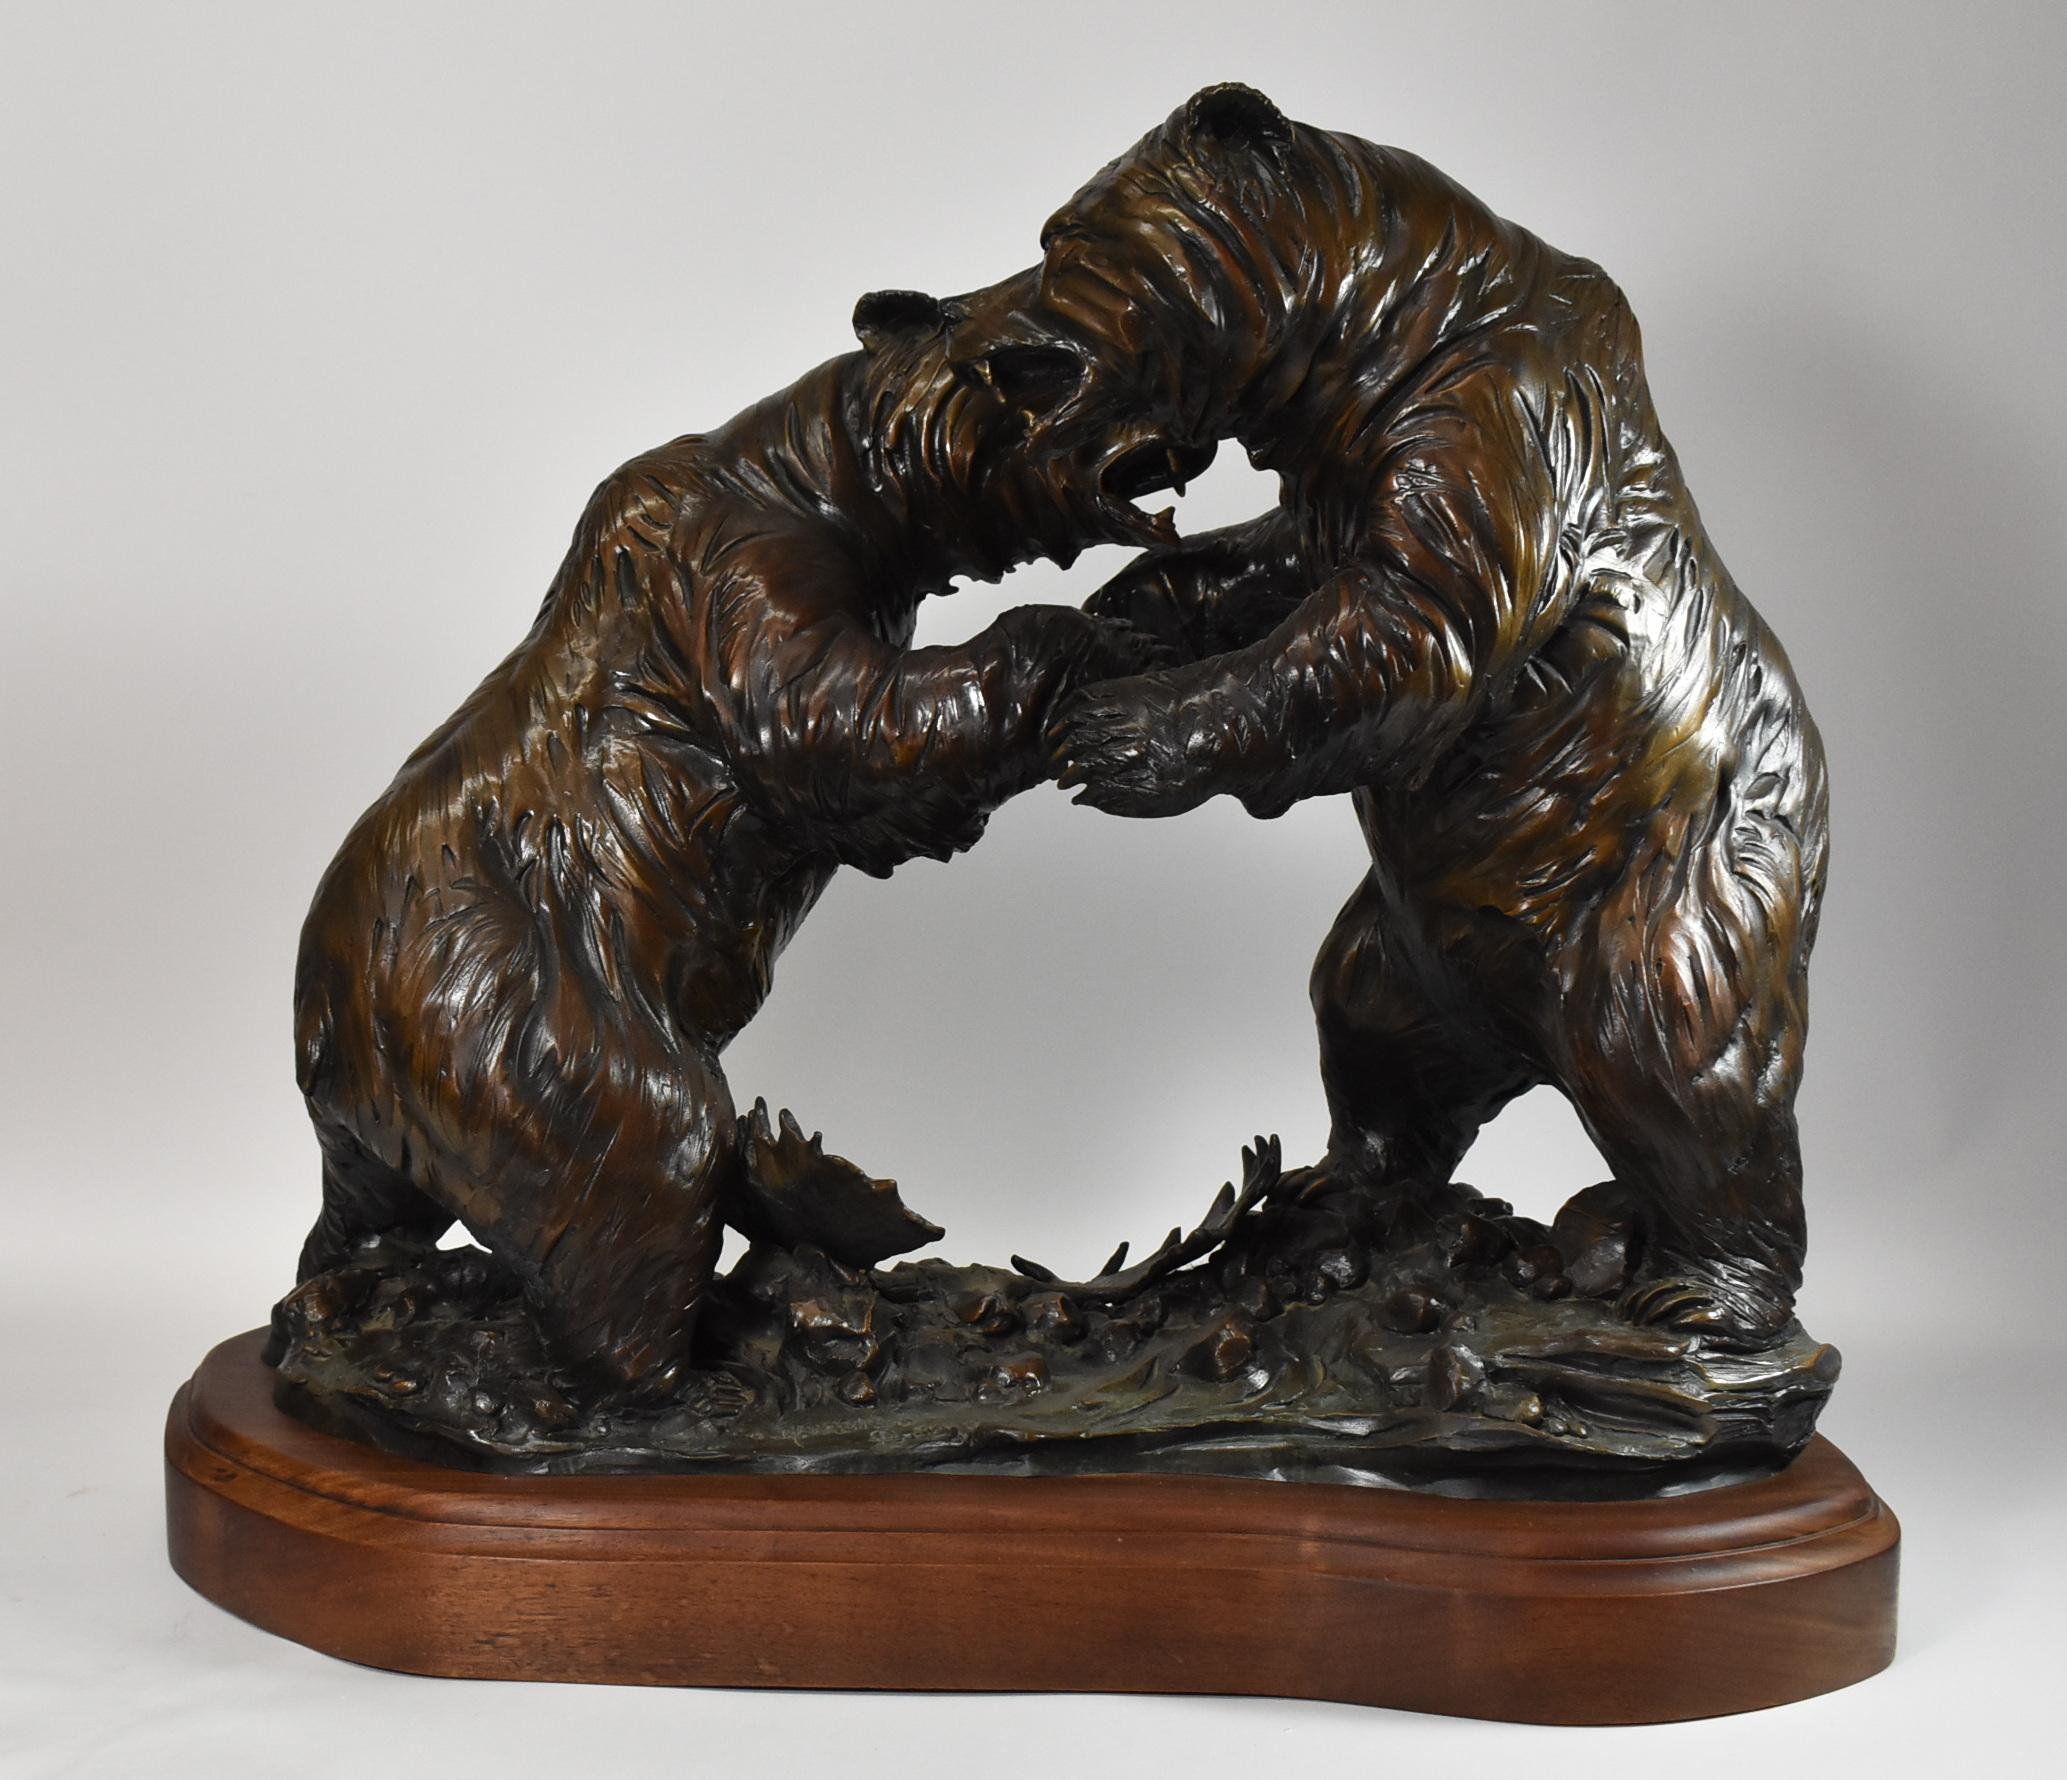 Cabela's replica bronze sculpture of two fighting bears tiled 